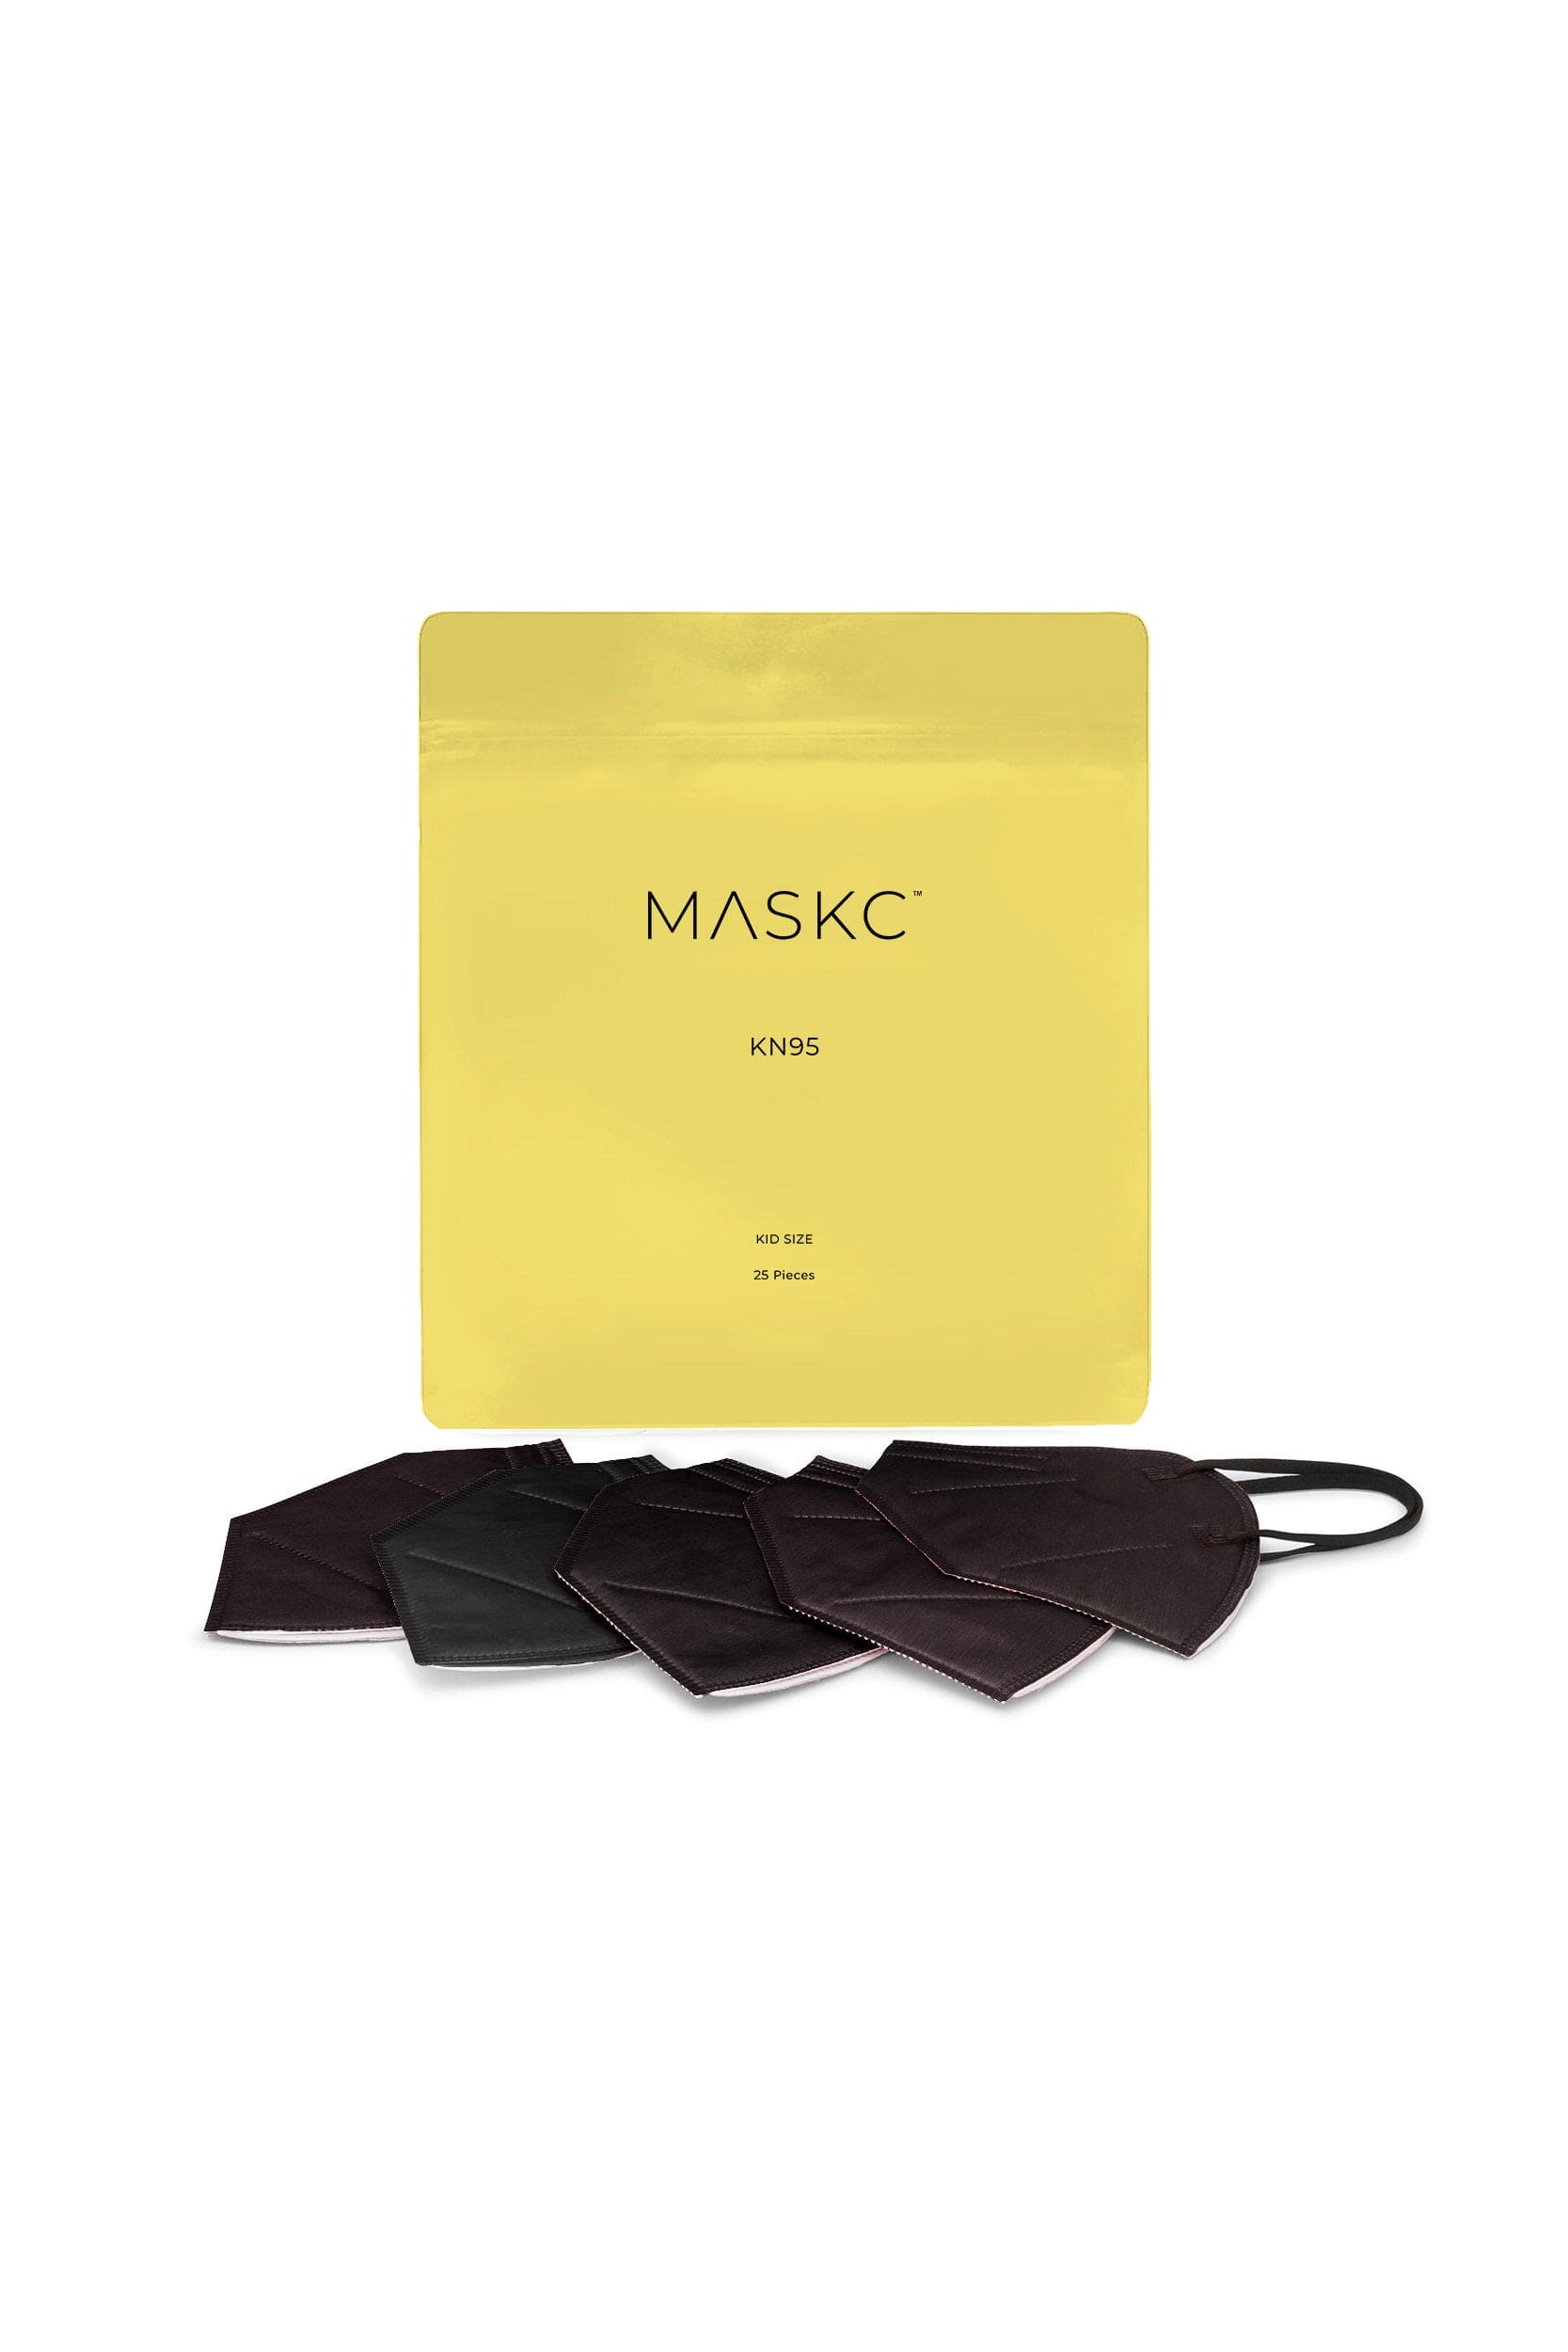 25 Pack of Kids Black KN95 face masks. Each pack contains stylish high quality face masks. 